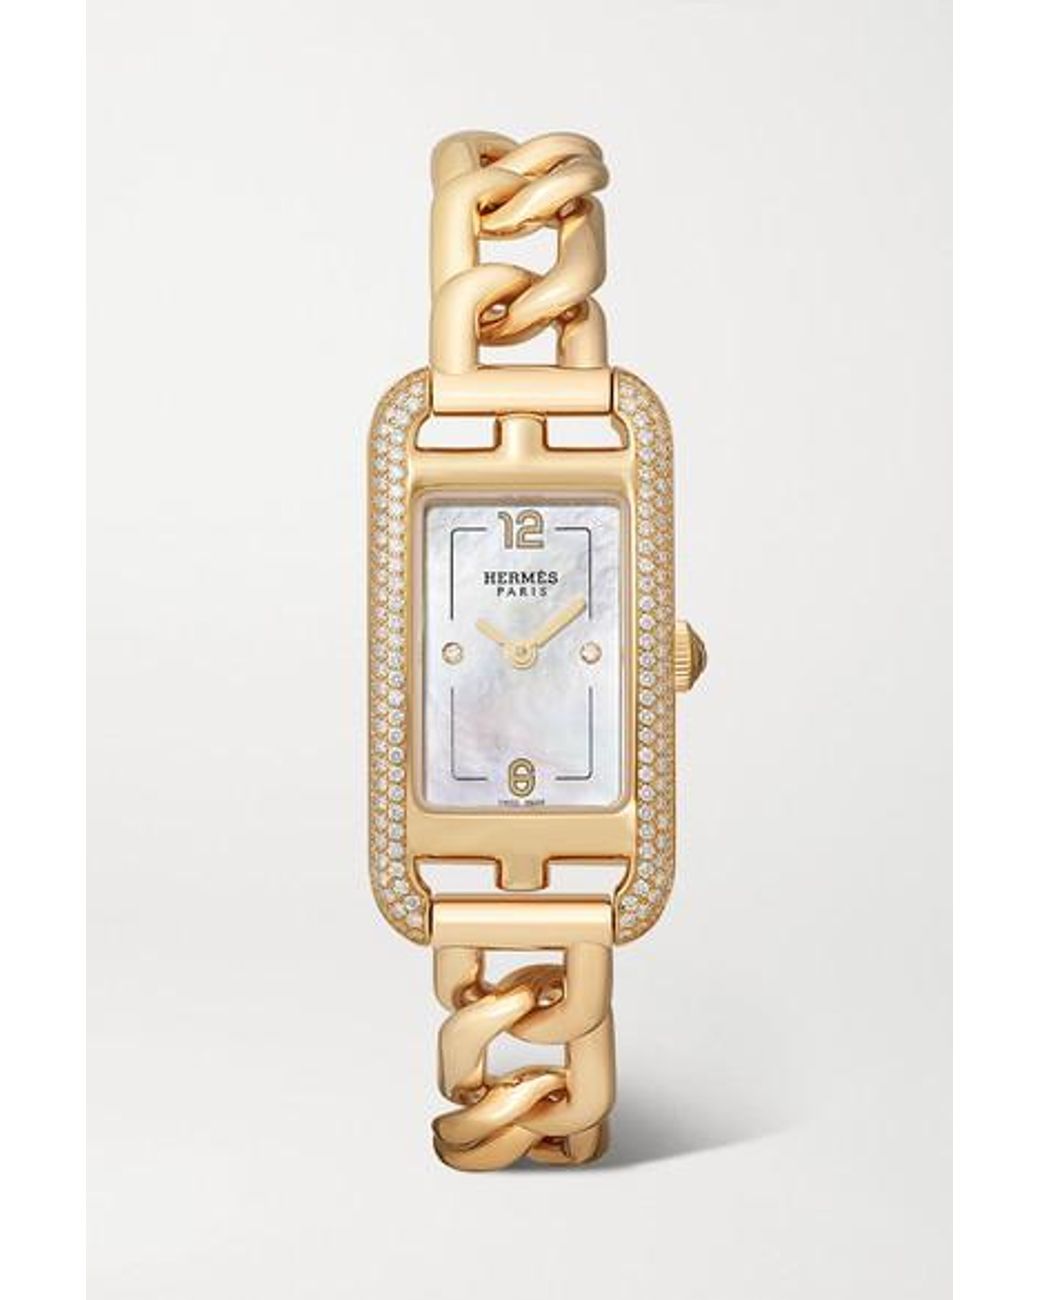 Hermès Nantucket 17mm Very Small 18-karat Rose Gold, Diamond And Mother-of-pearl  Watch in Metallic